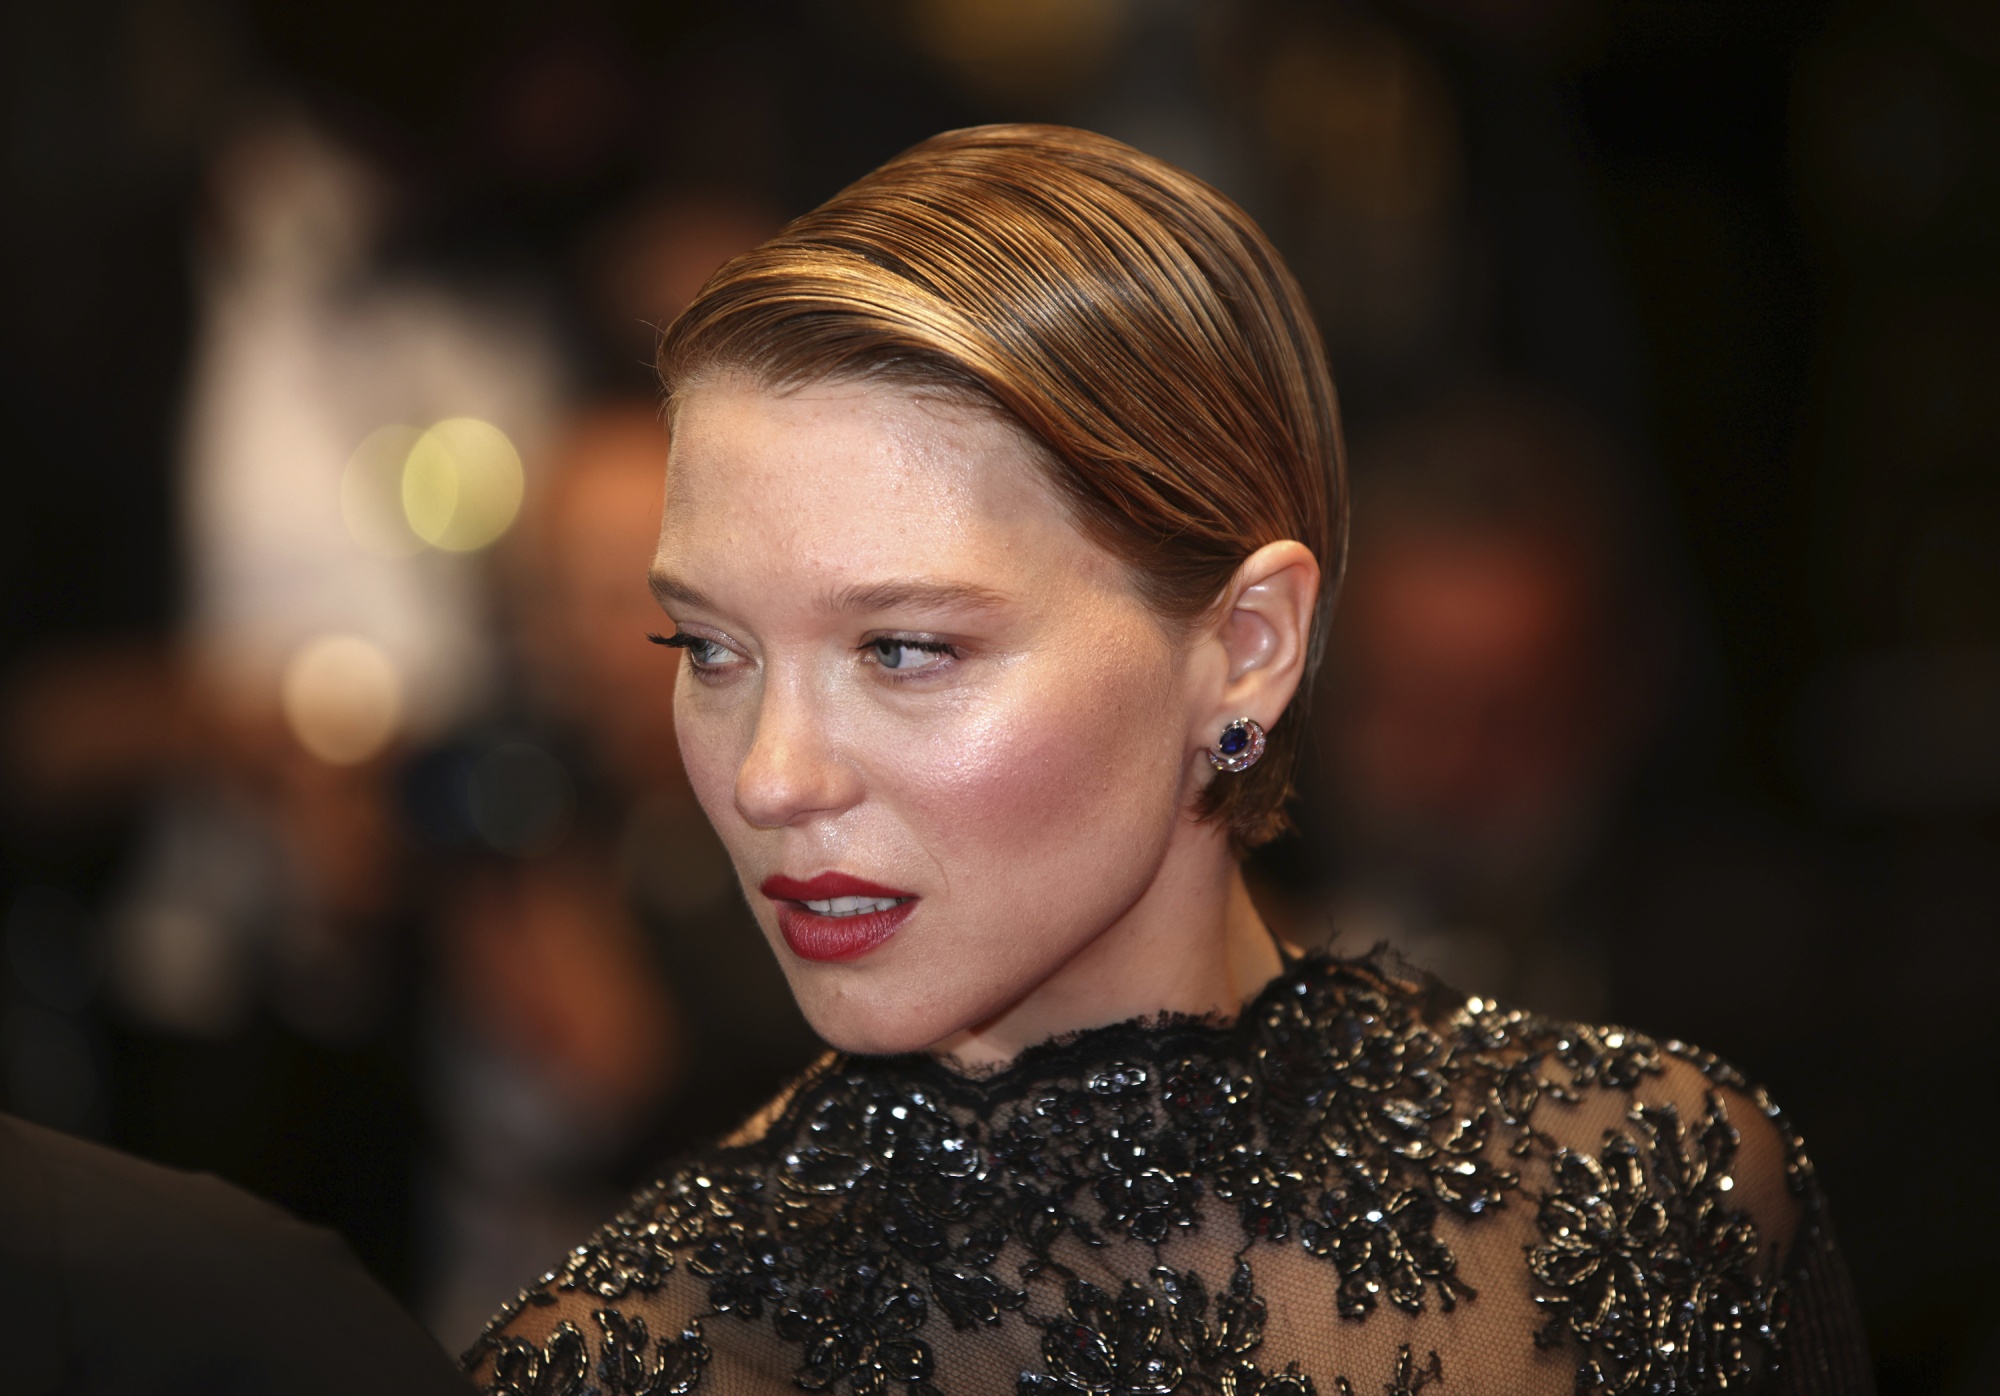 Léa Seydoux: Cinema is a way to question the world